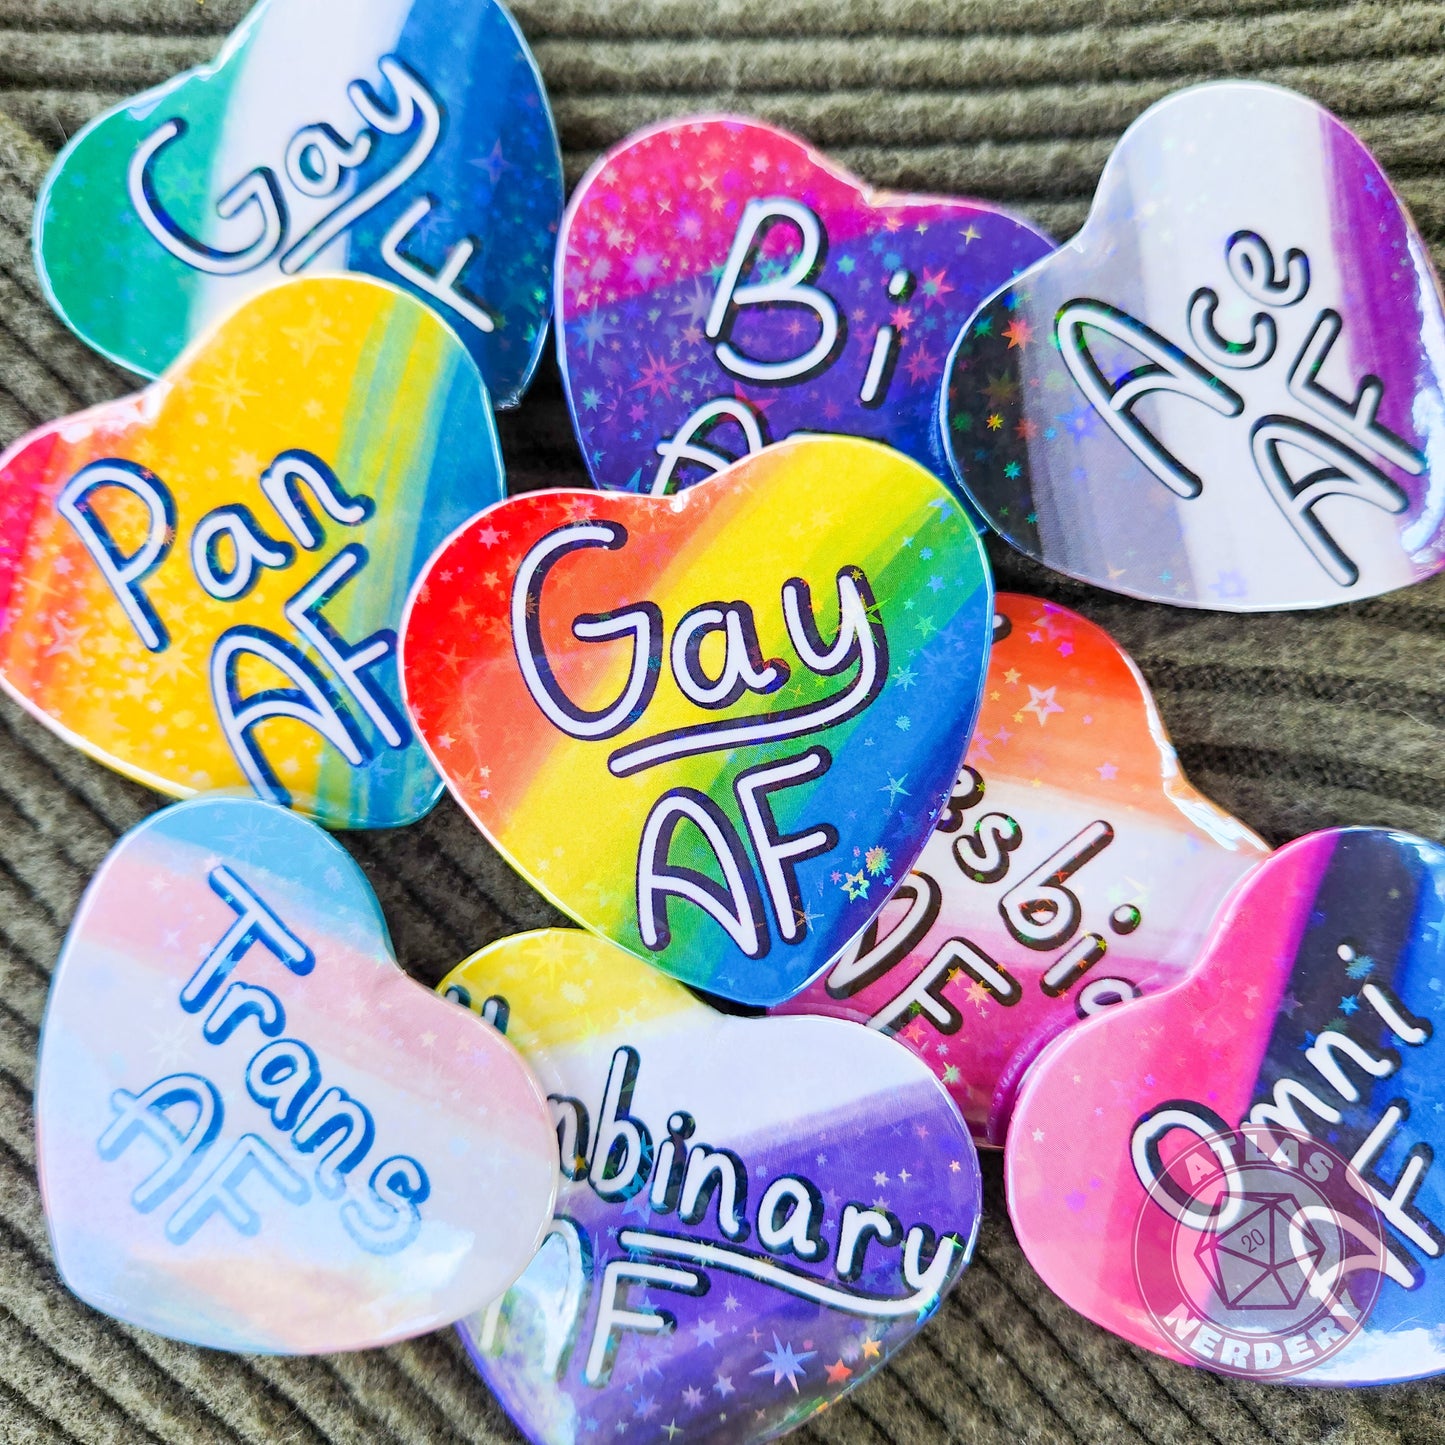 Ace AF - Asexual Pride 2.25” x 2” Holographic Heart Shaped Pinback Button